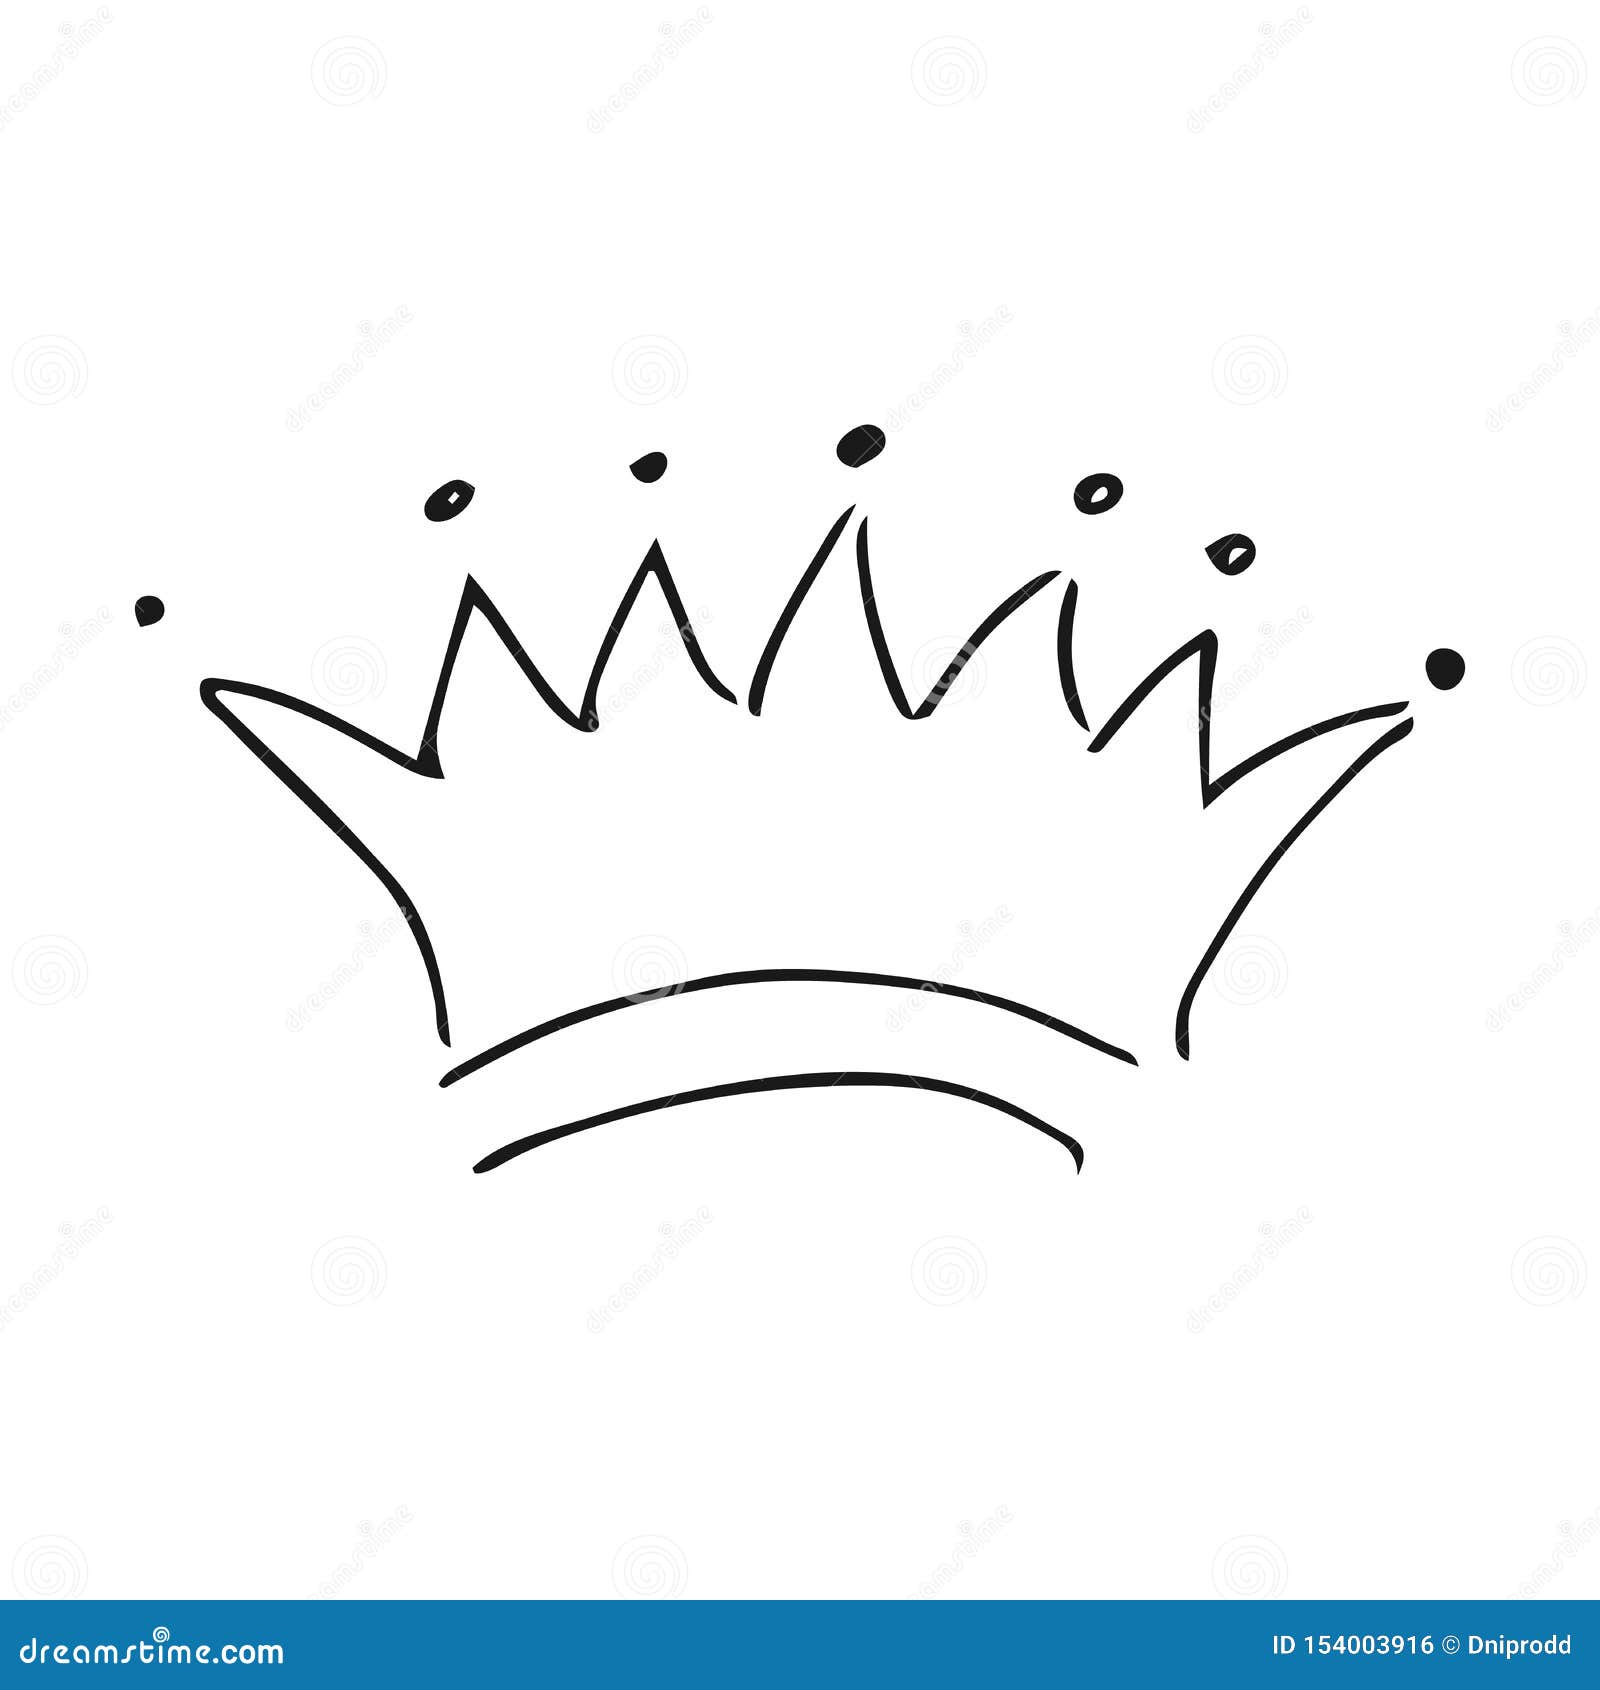 Graffiti Sketch Queen or King Hand Drawn Crown Stock Vector ...